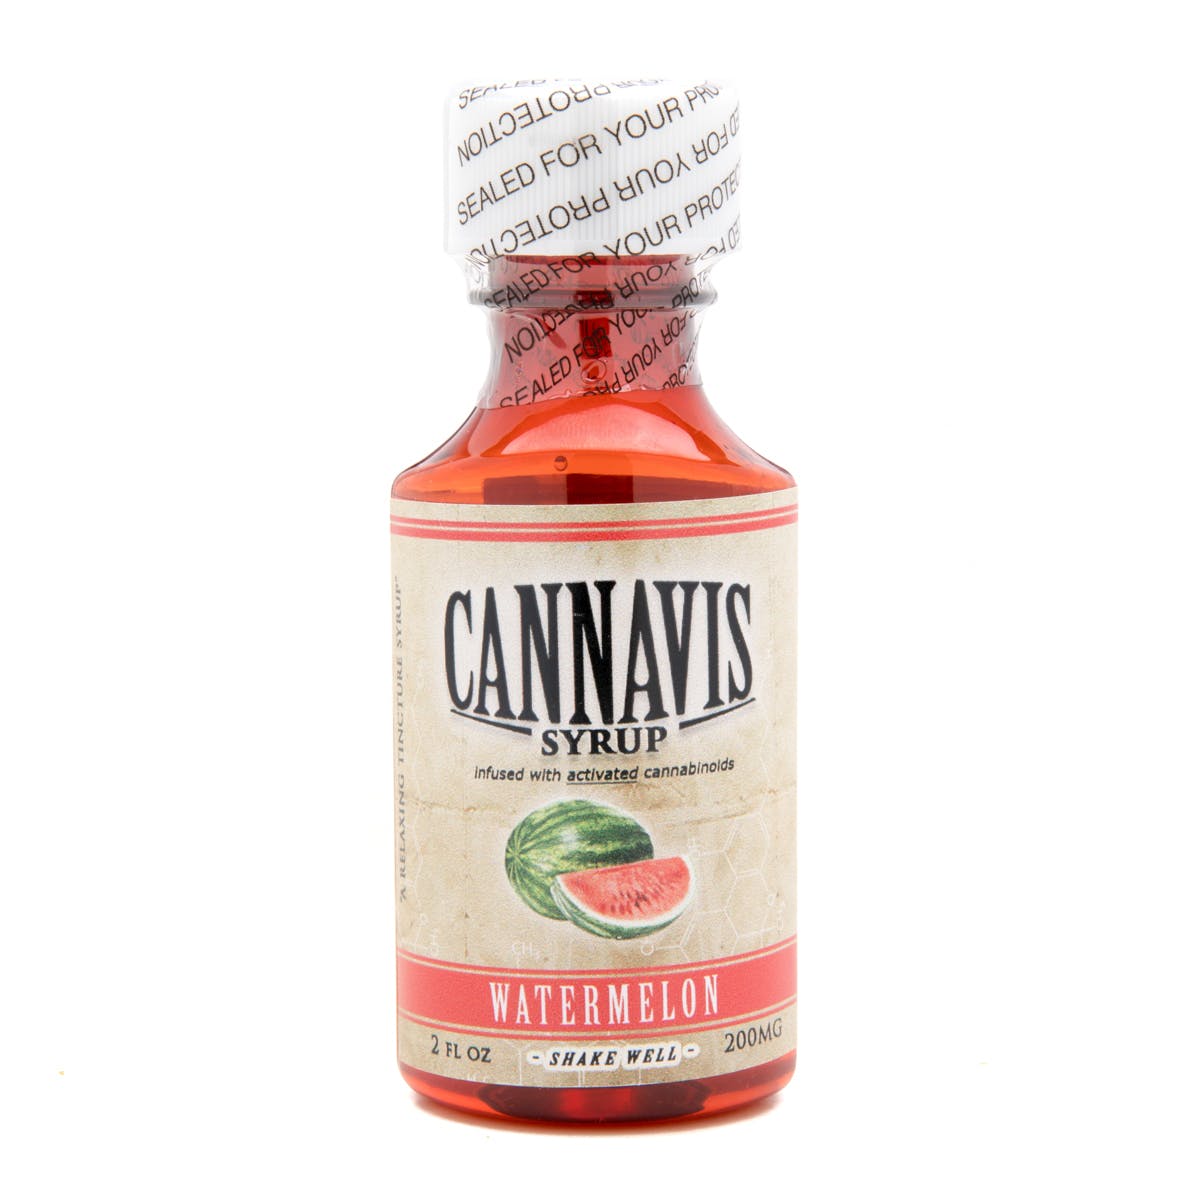 marijuana-dispensaries-church-of-holy-fire-in-city-of-industry-cannavis-syrup-2c-watermelon-200mg